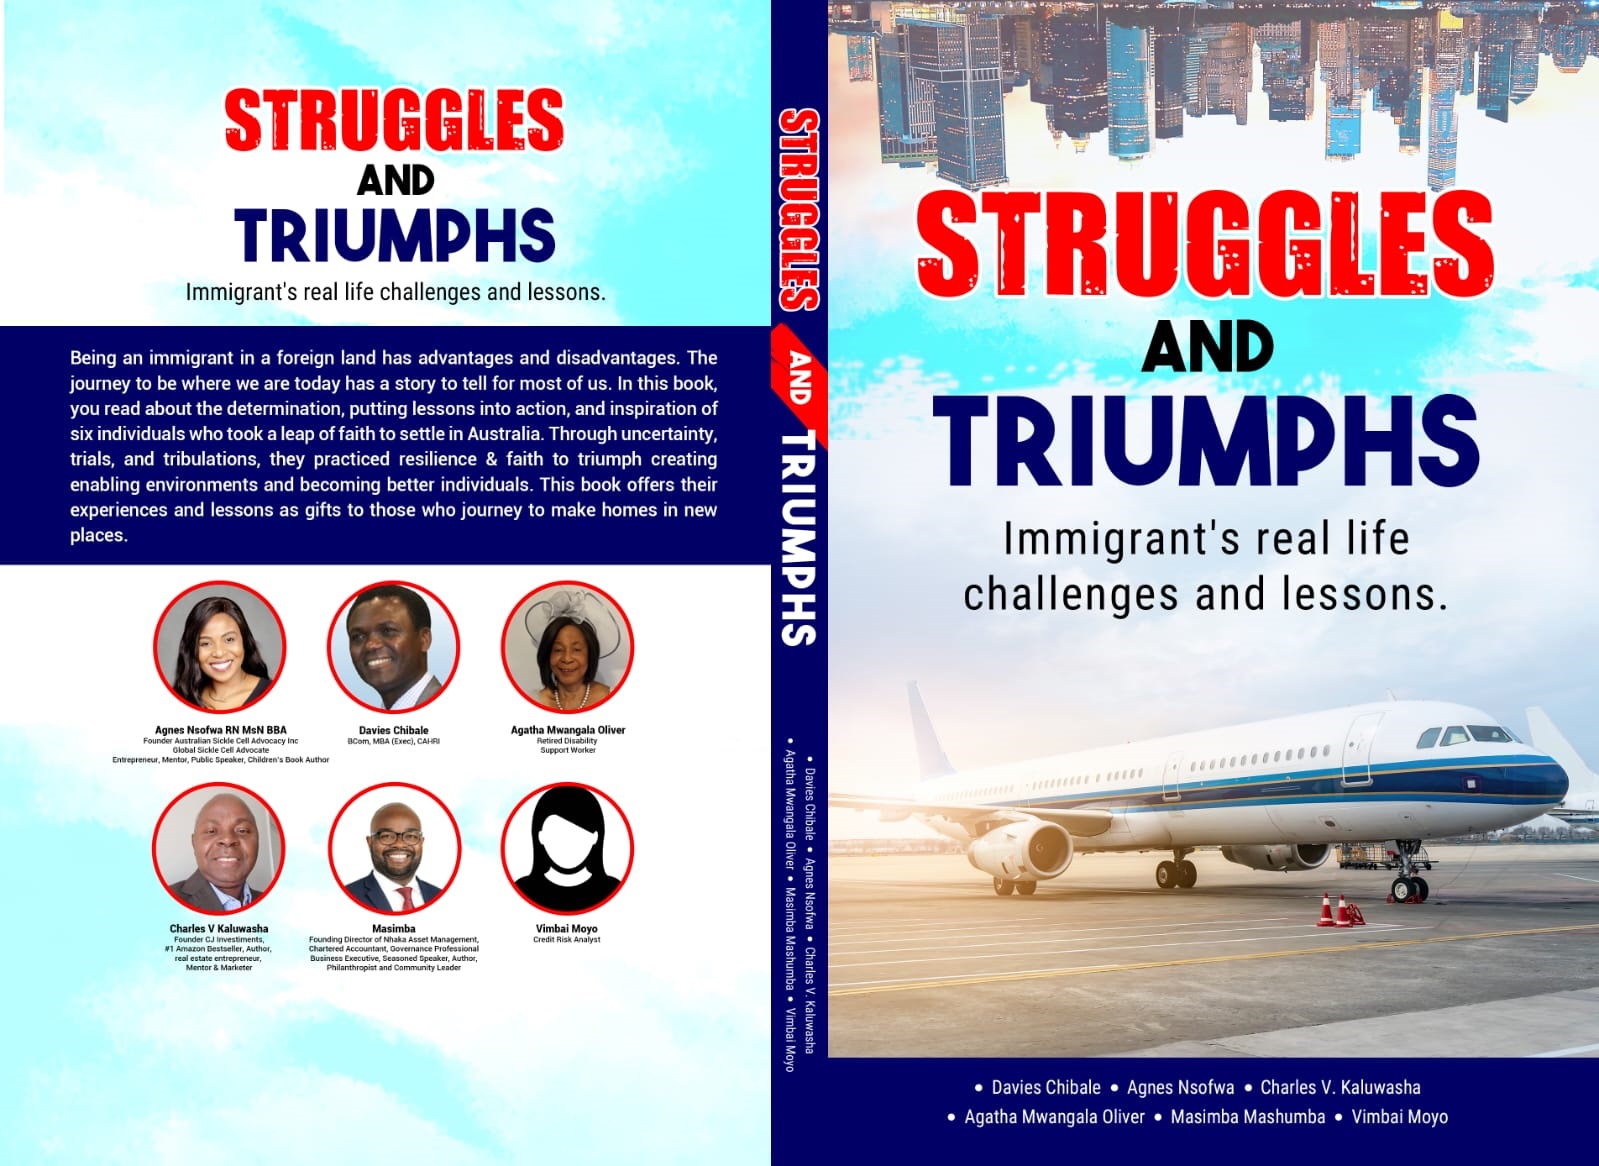 Struggles and Triumphs book cover